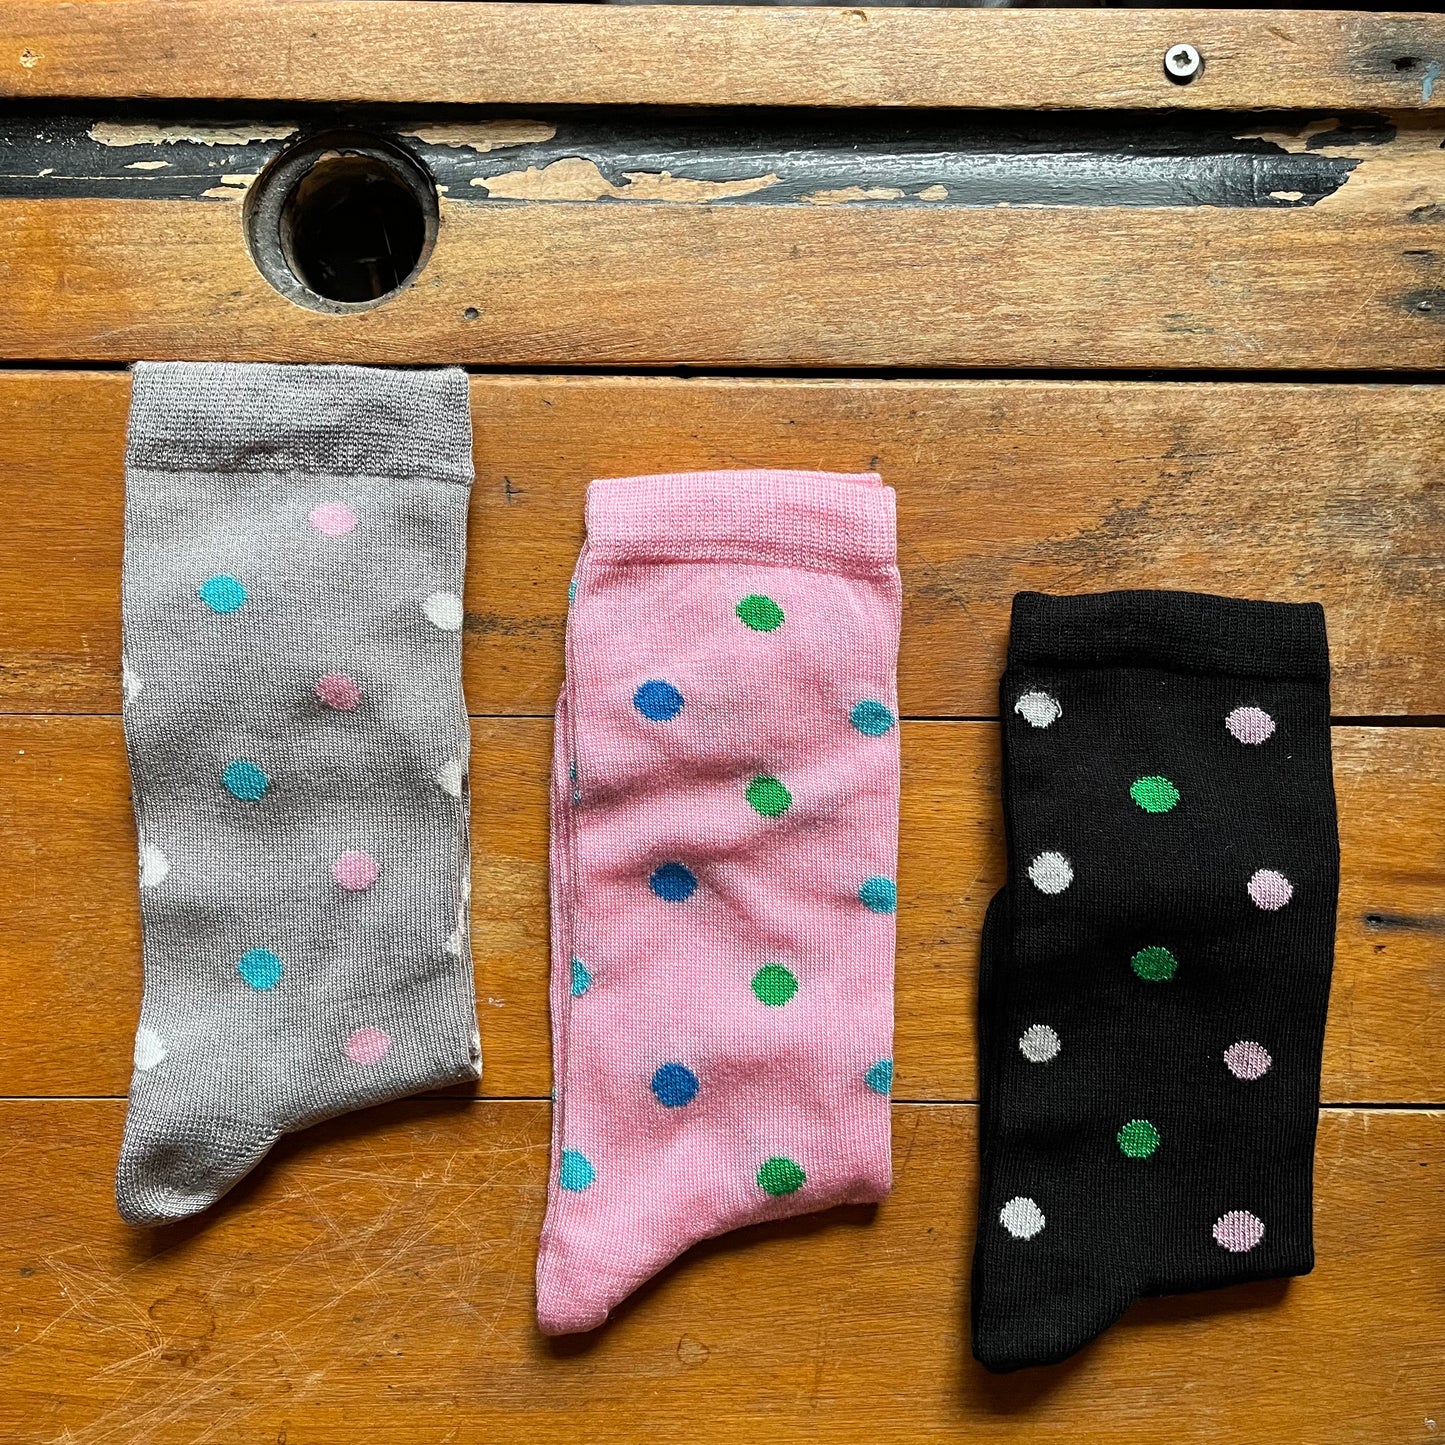 Bamboo - 3 Pack Sock Set - Black, Grey & Pink with Spots - Ladies